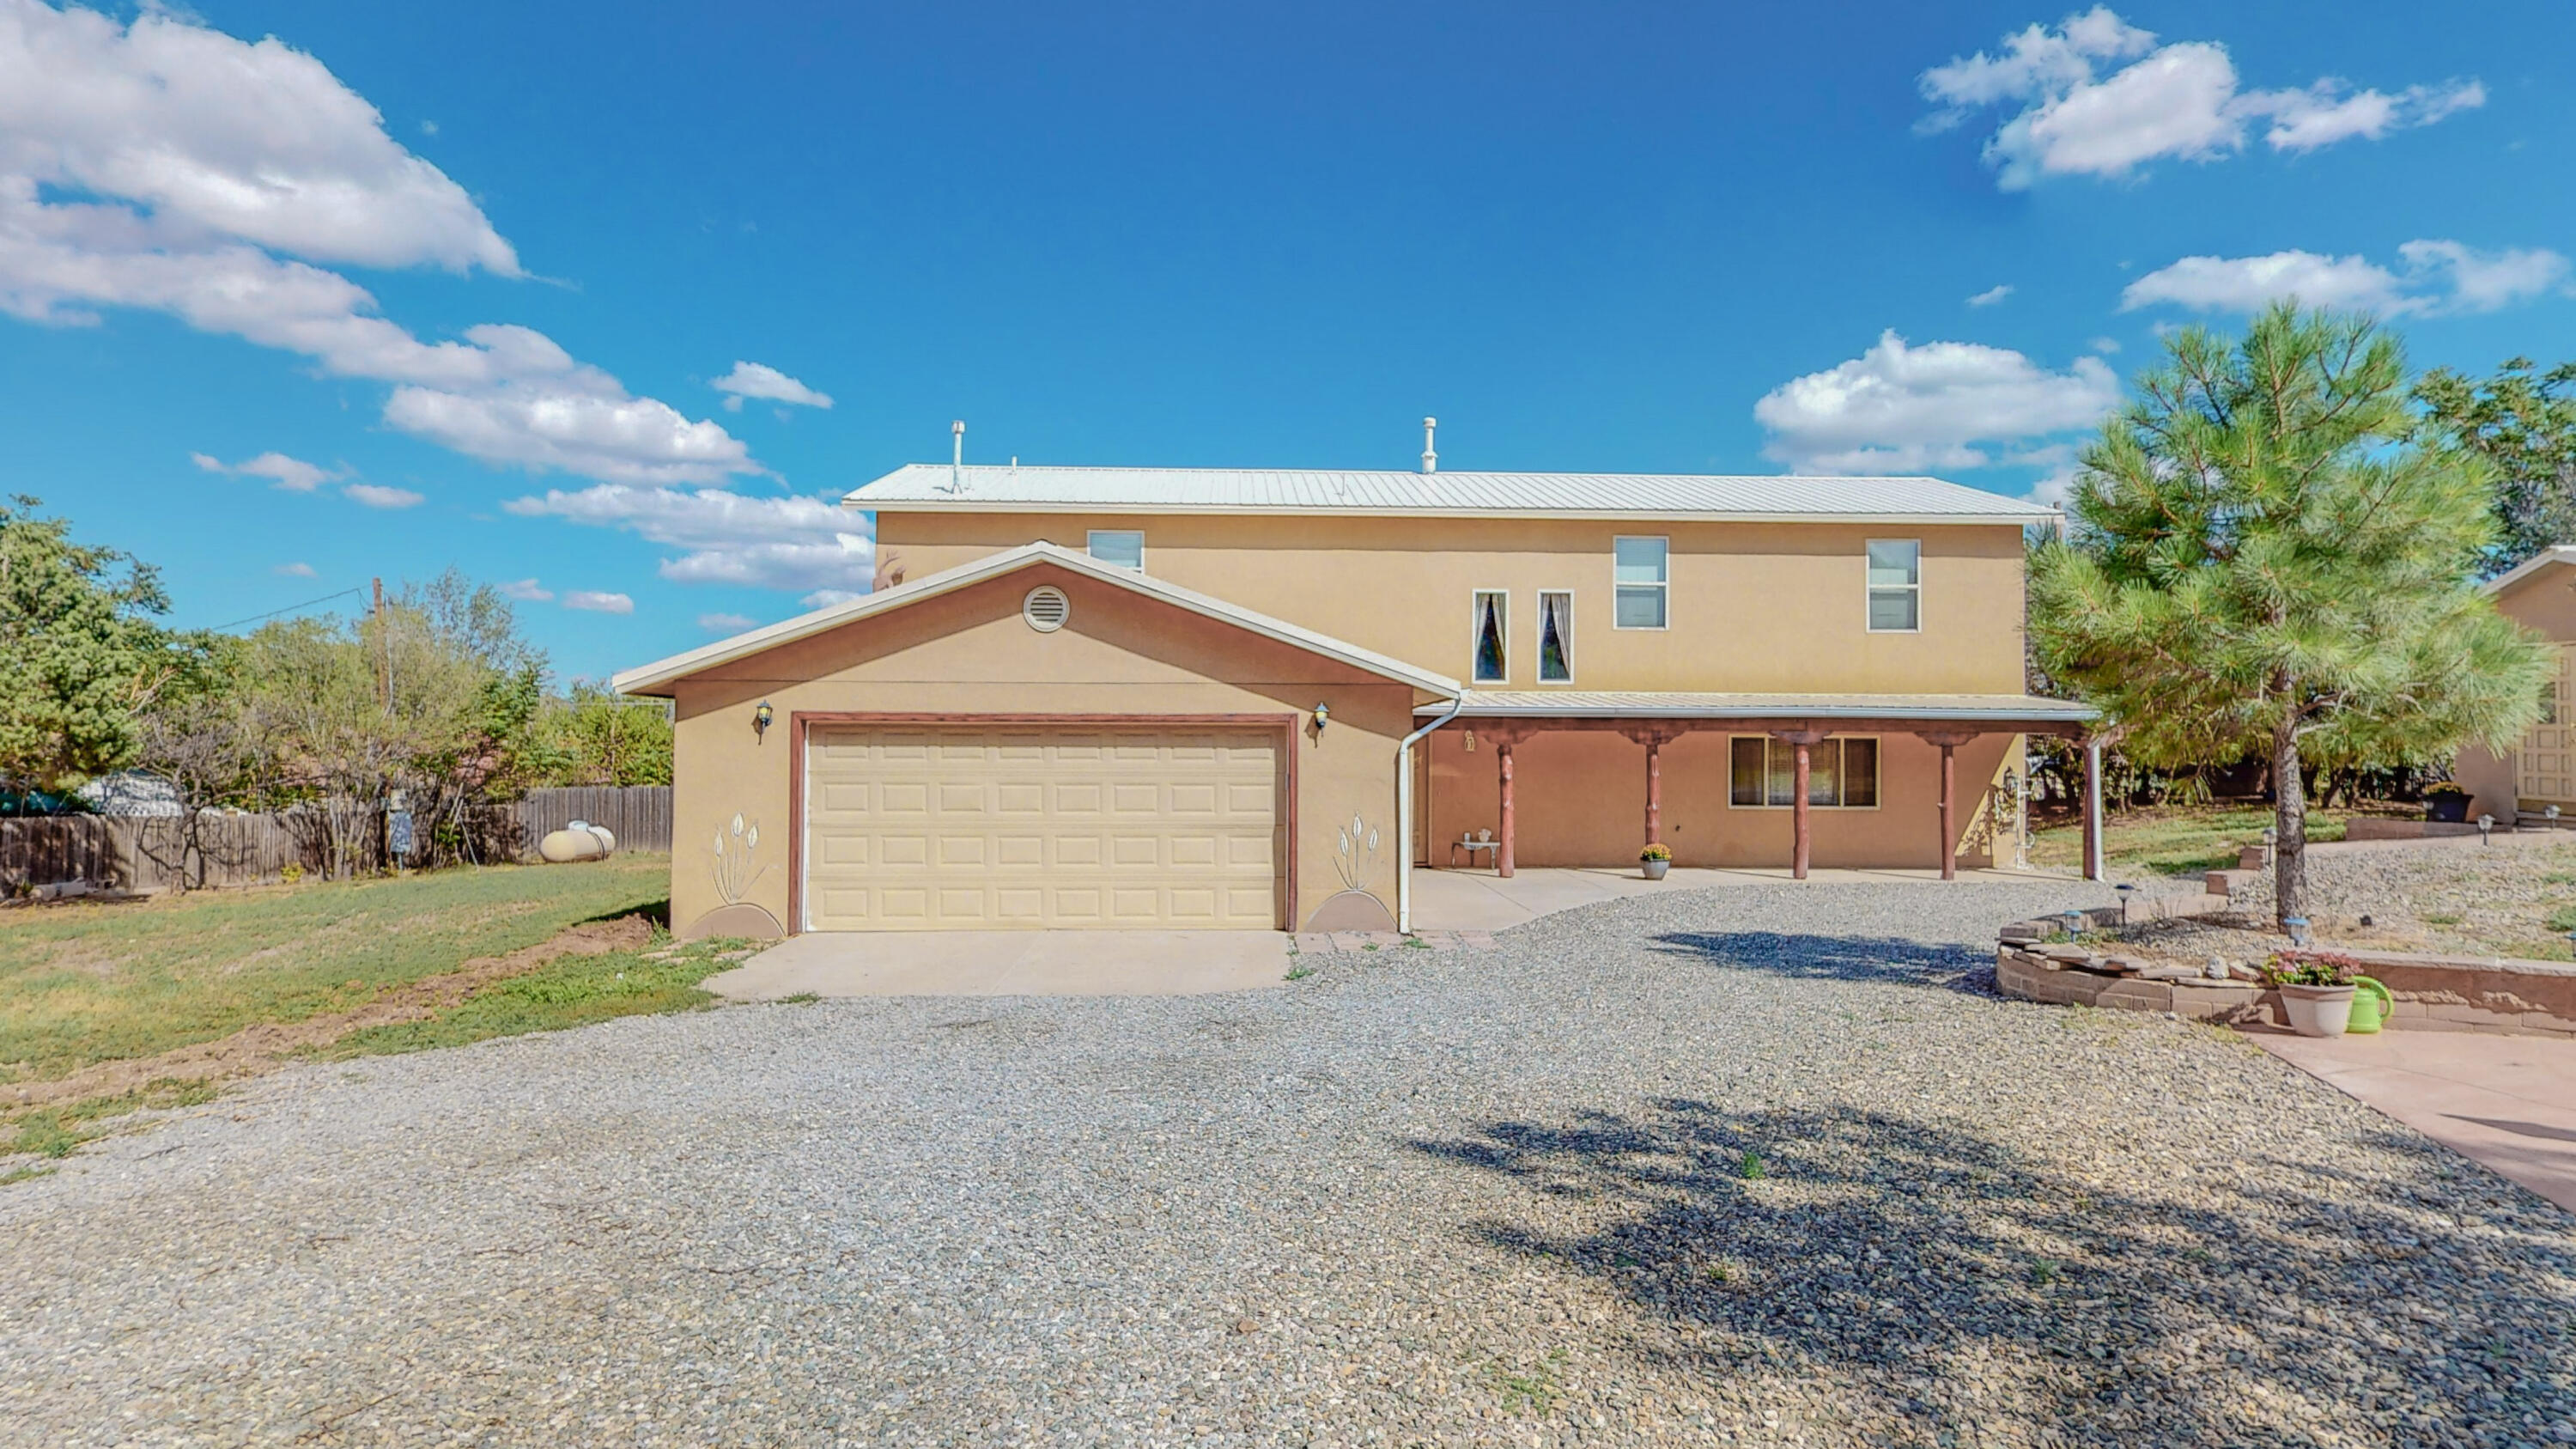 Welcome to this Beautiful Mountain Retreat located within minutes of the Sandia Ski Basin. Large living spaces, spacious bedrooms, Refrigerated air and stainless steel appliances. Come see your future home today!